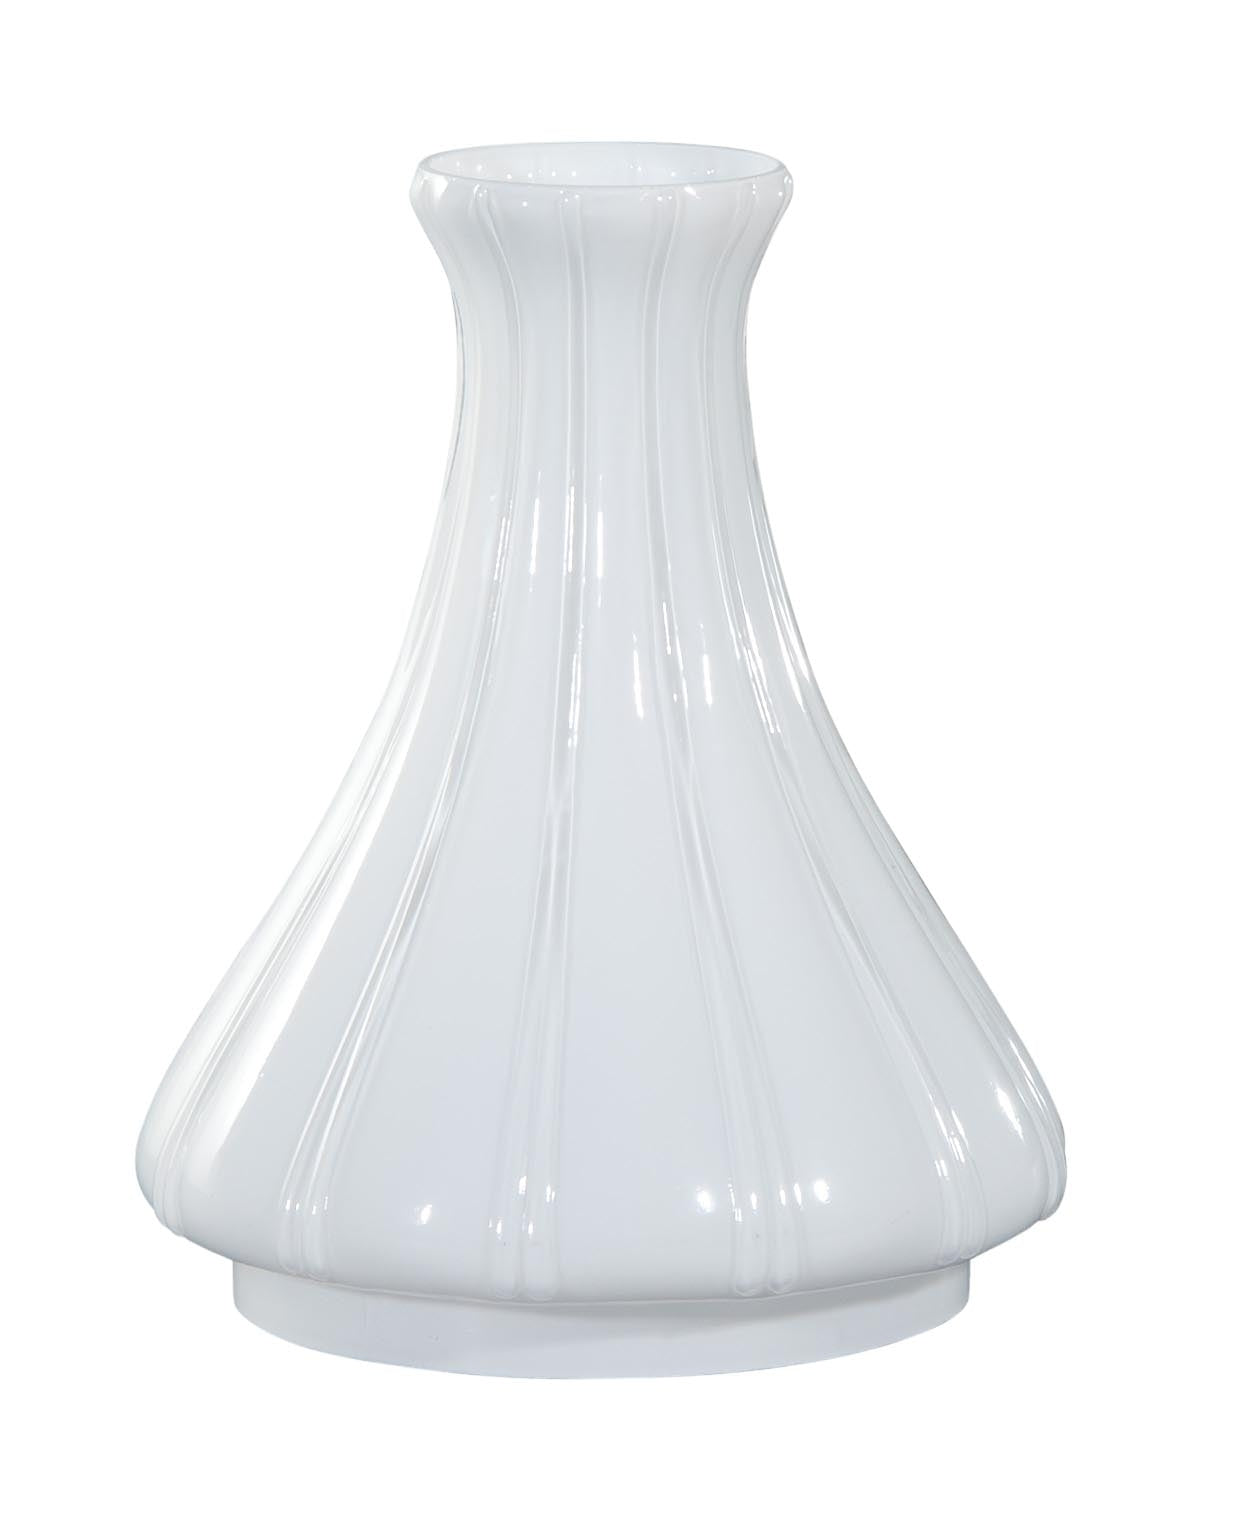 5 1/2" Fitter, 8 3/4" Tall Opal Glass Angle Lamp Chimney